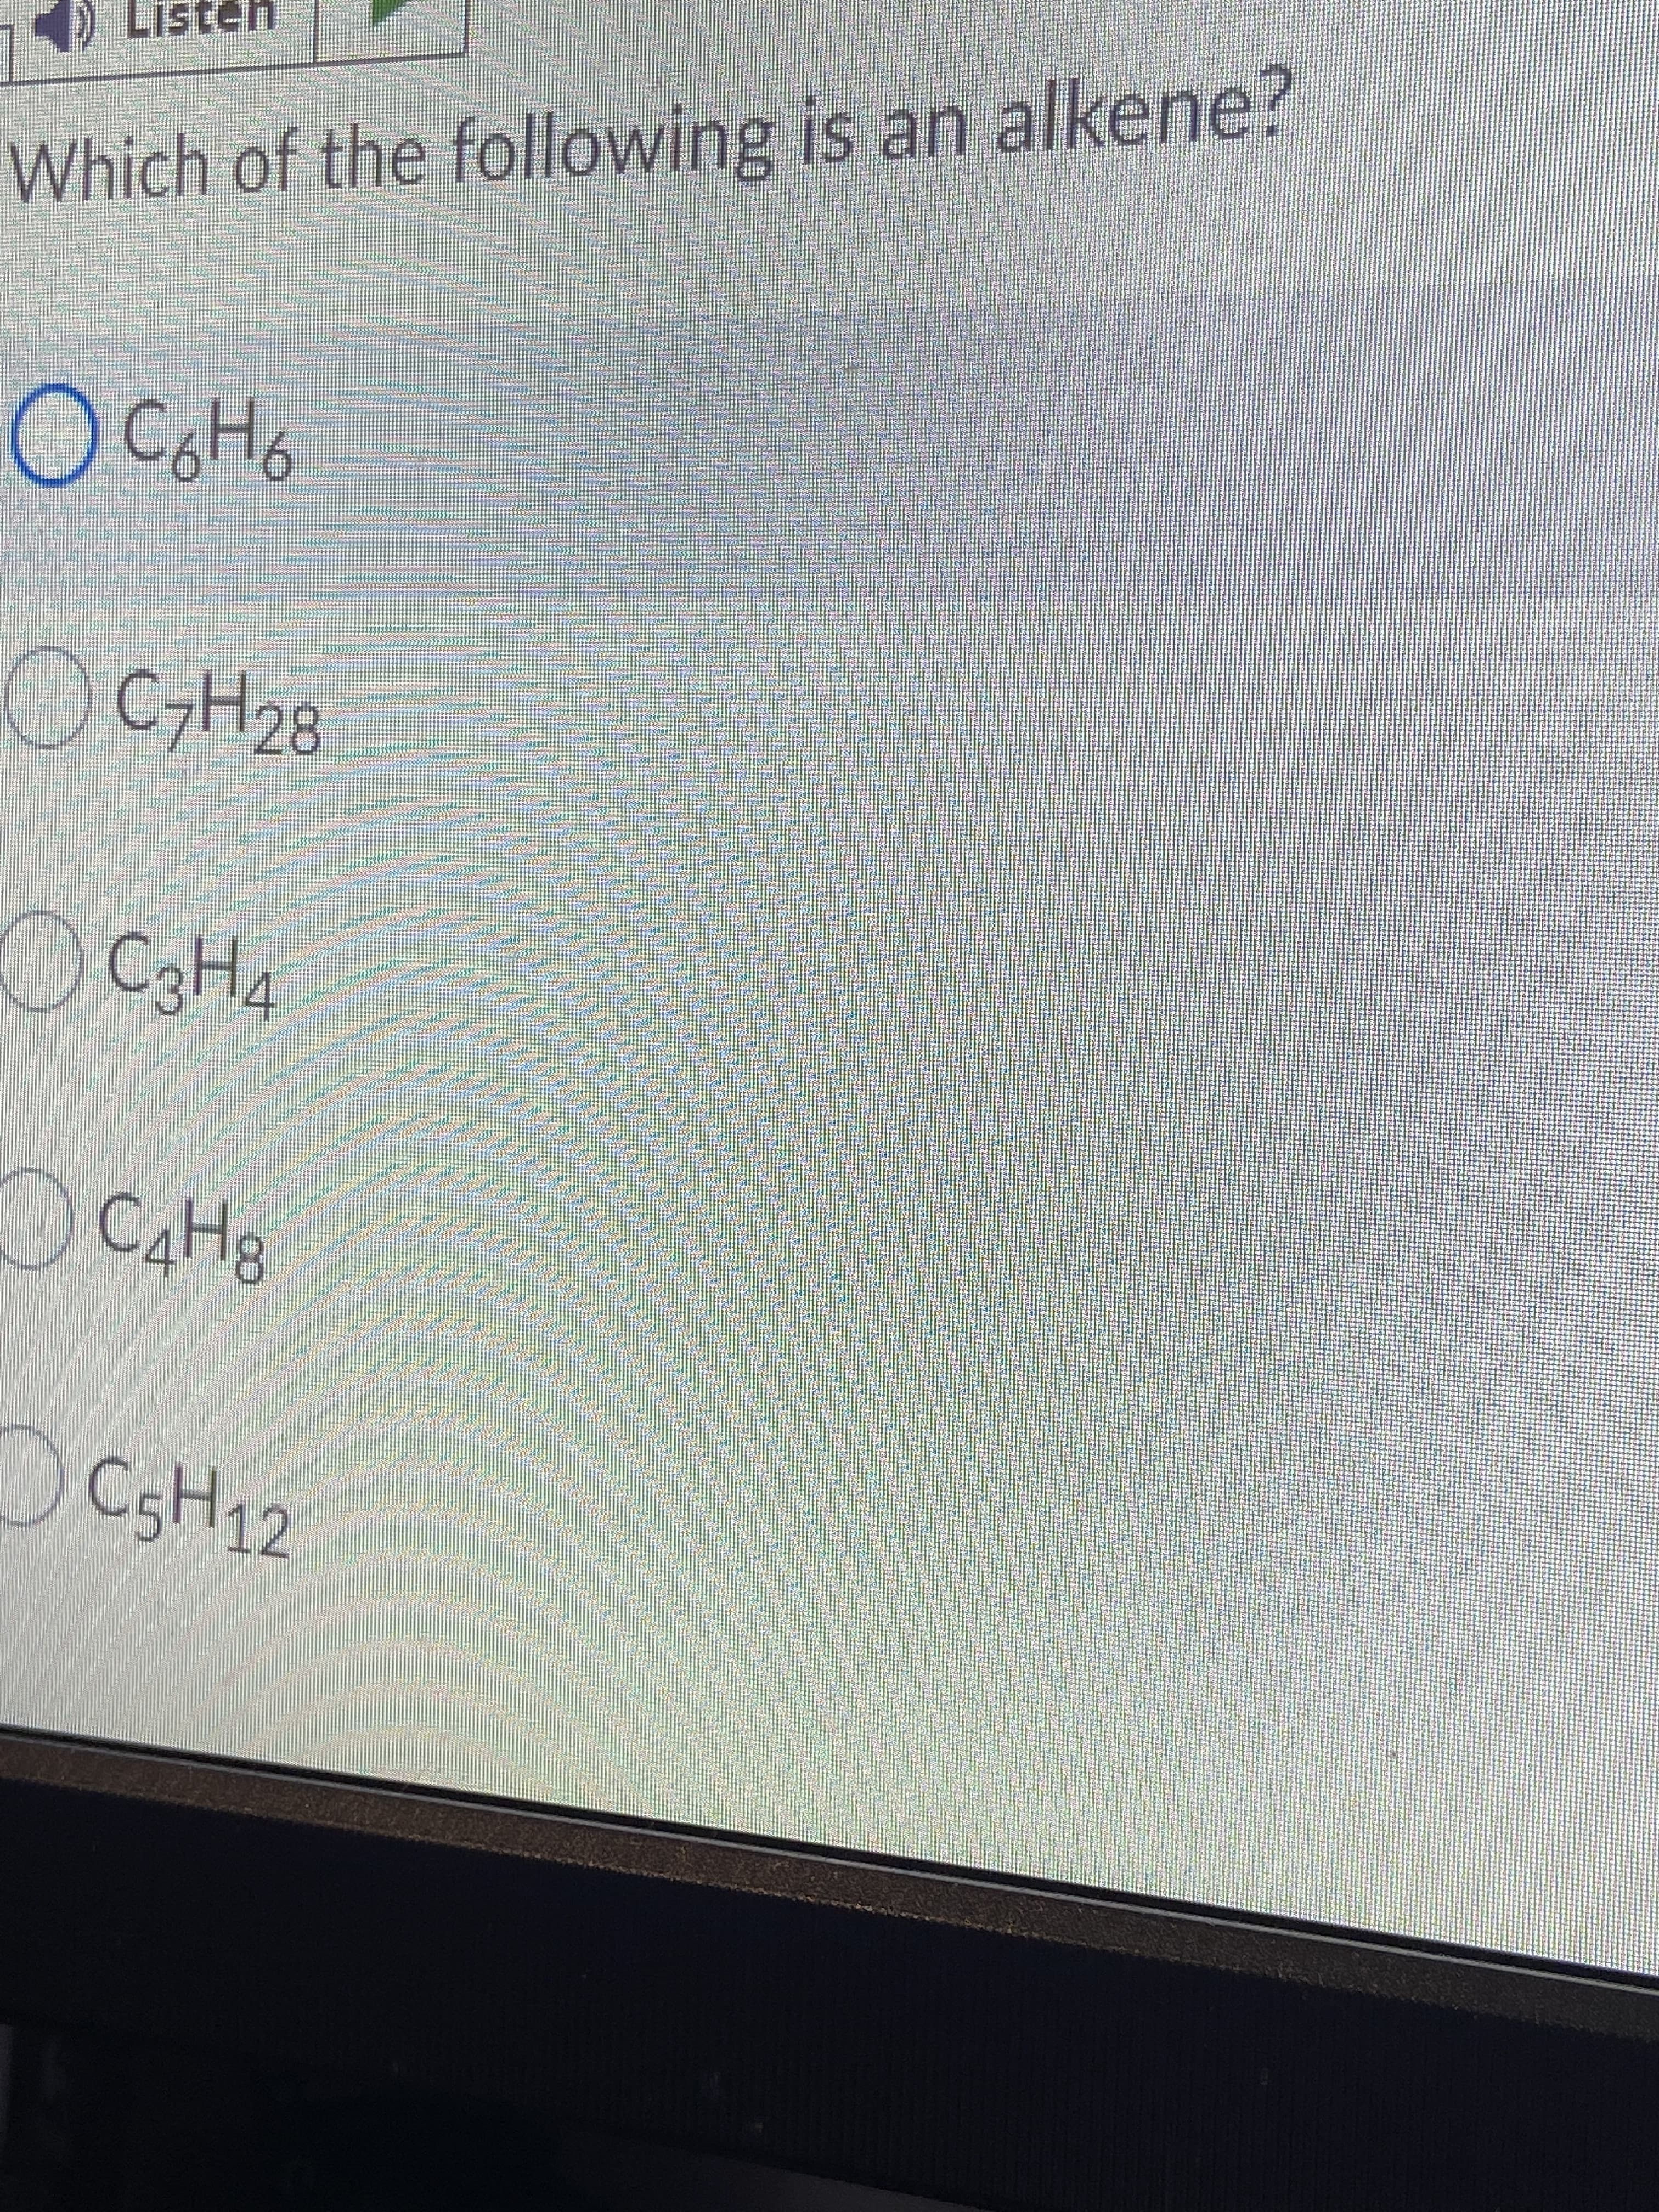 Which of the following is an alkene?
C7H28
C3H4
CSH12
